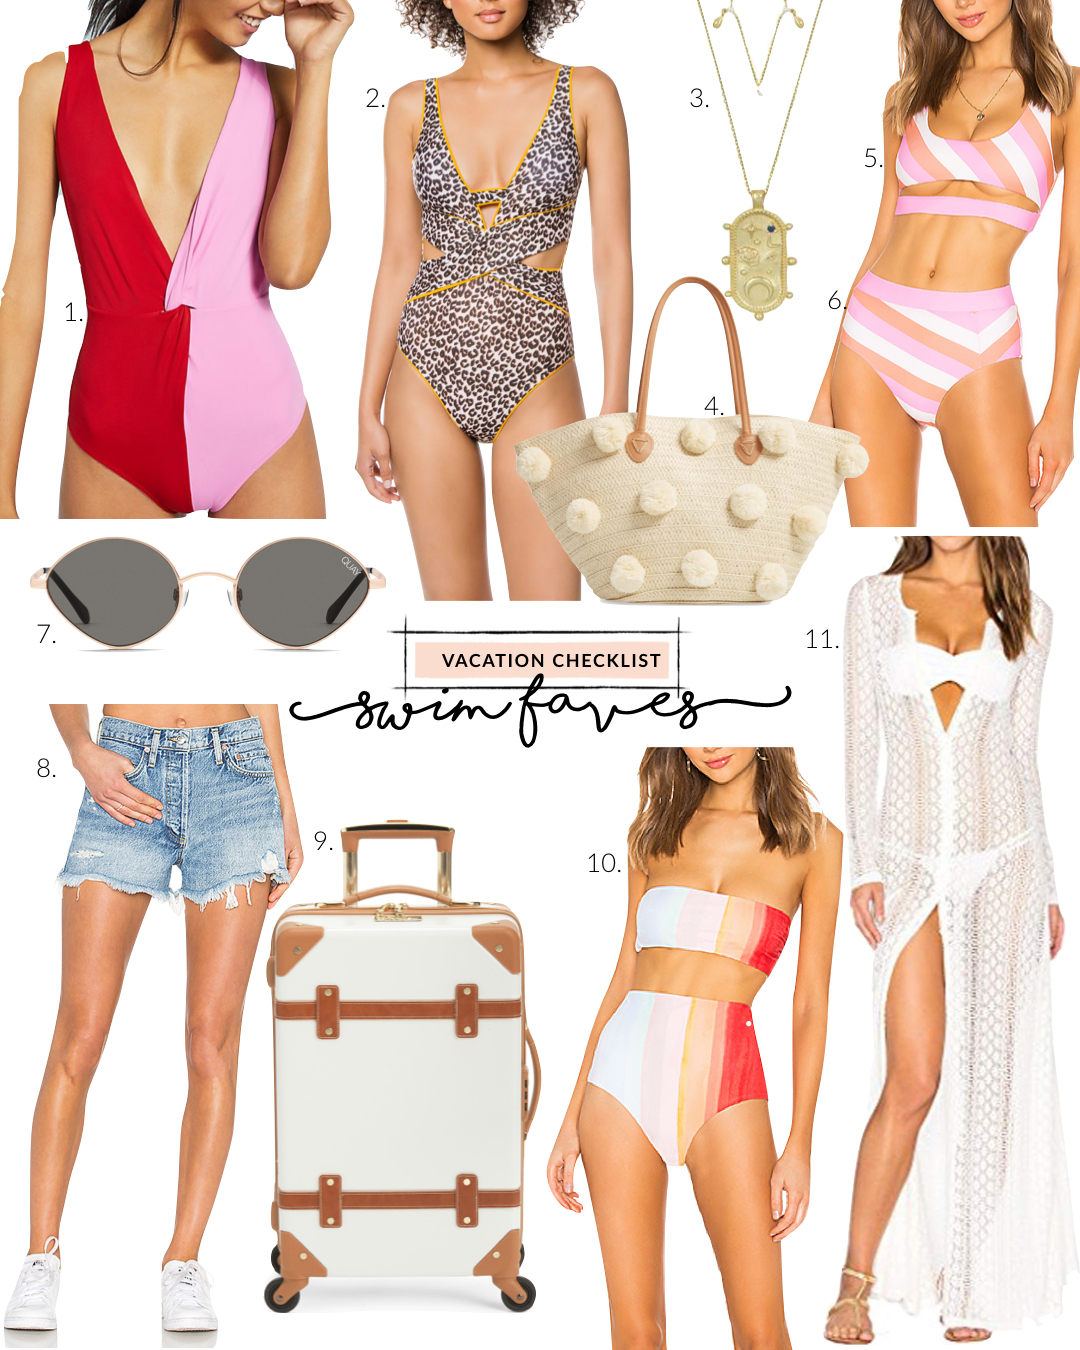 swimsuits for all - Gypsy Tan.001.jpeg.001